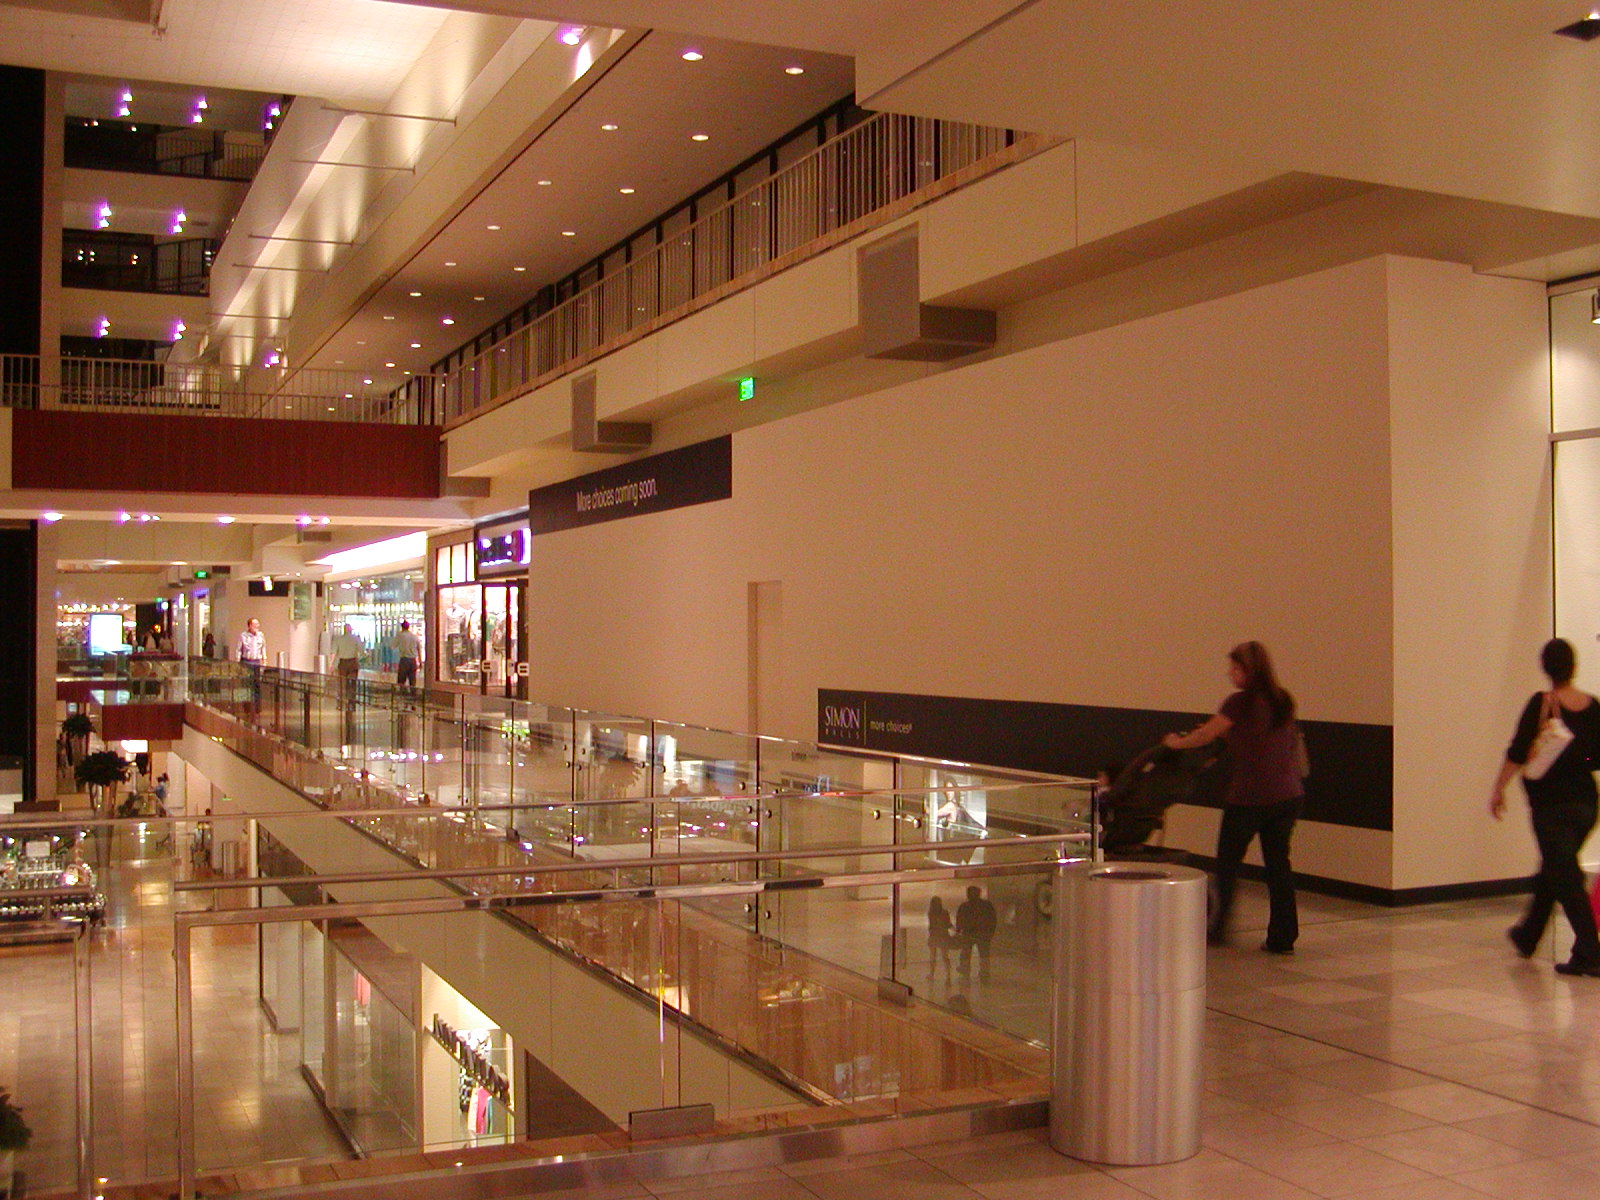 Labelscar: The Retail History BlogThe Galleria; Houston, Texas - Labelscar: The Retail History Blog